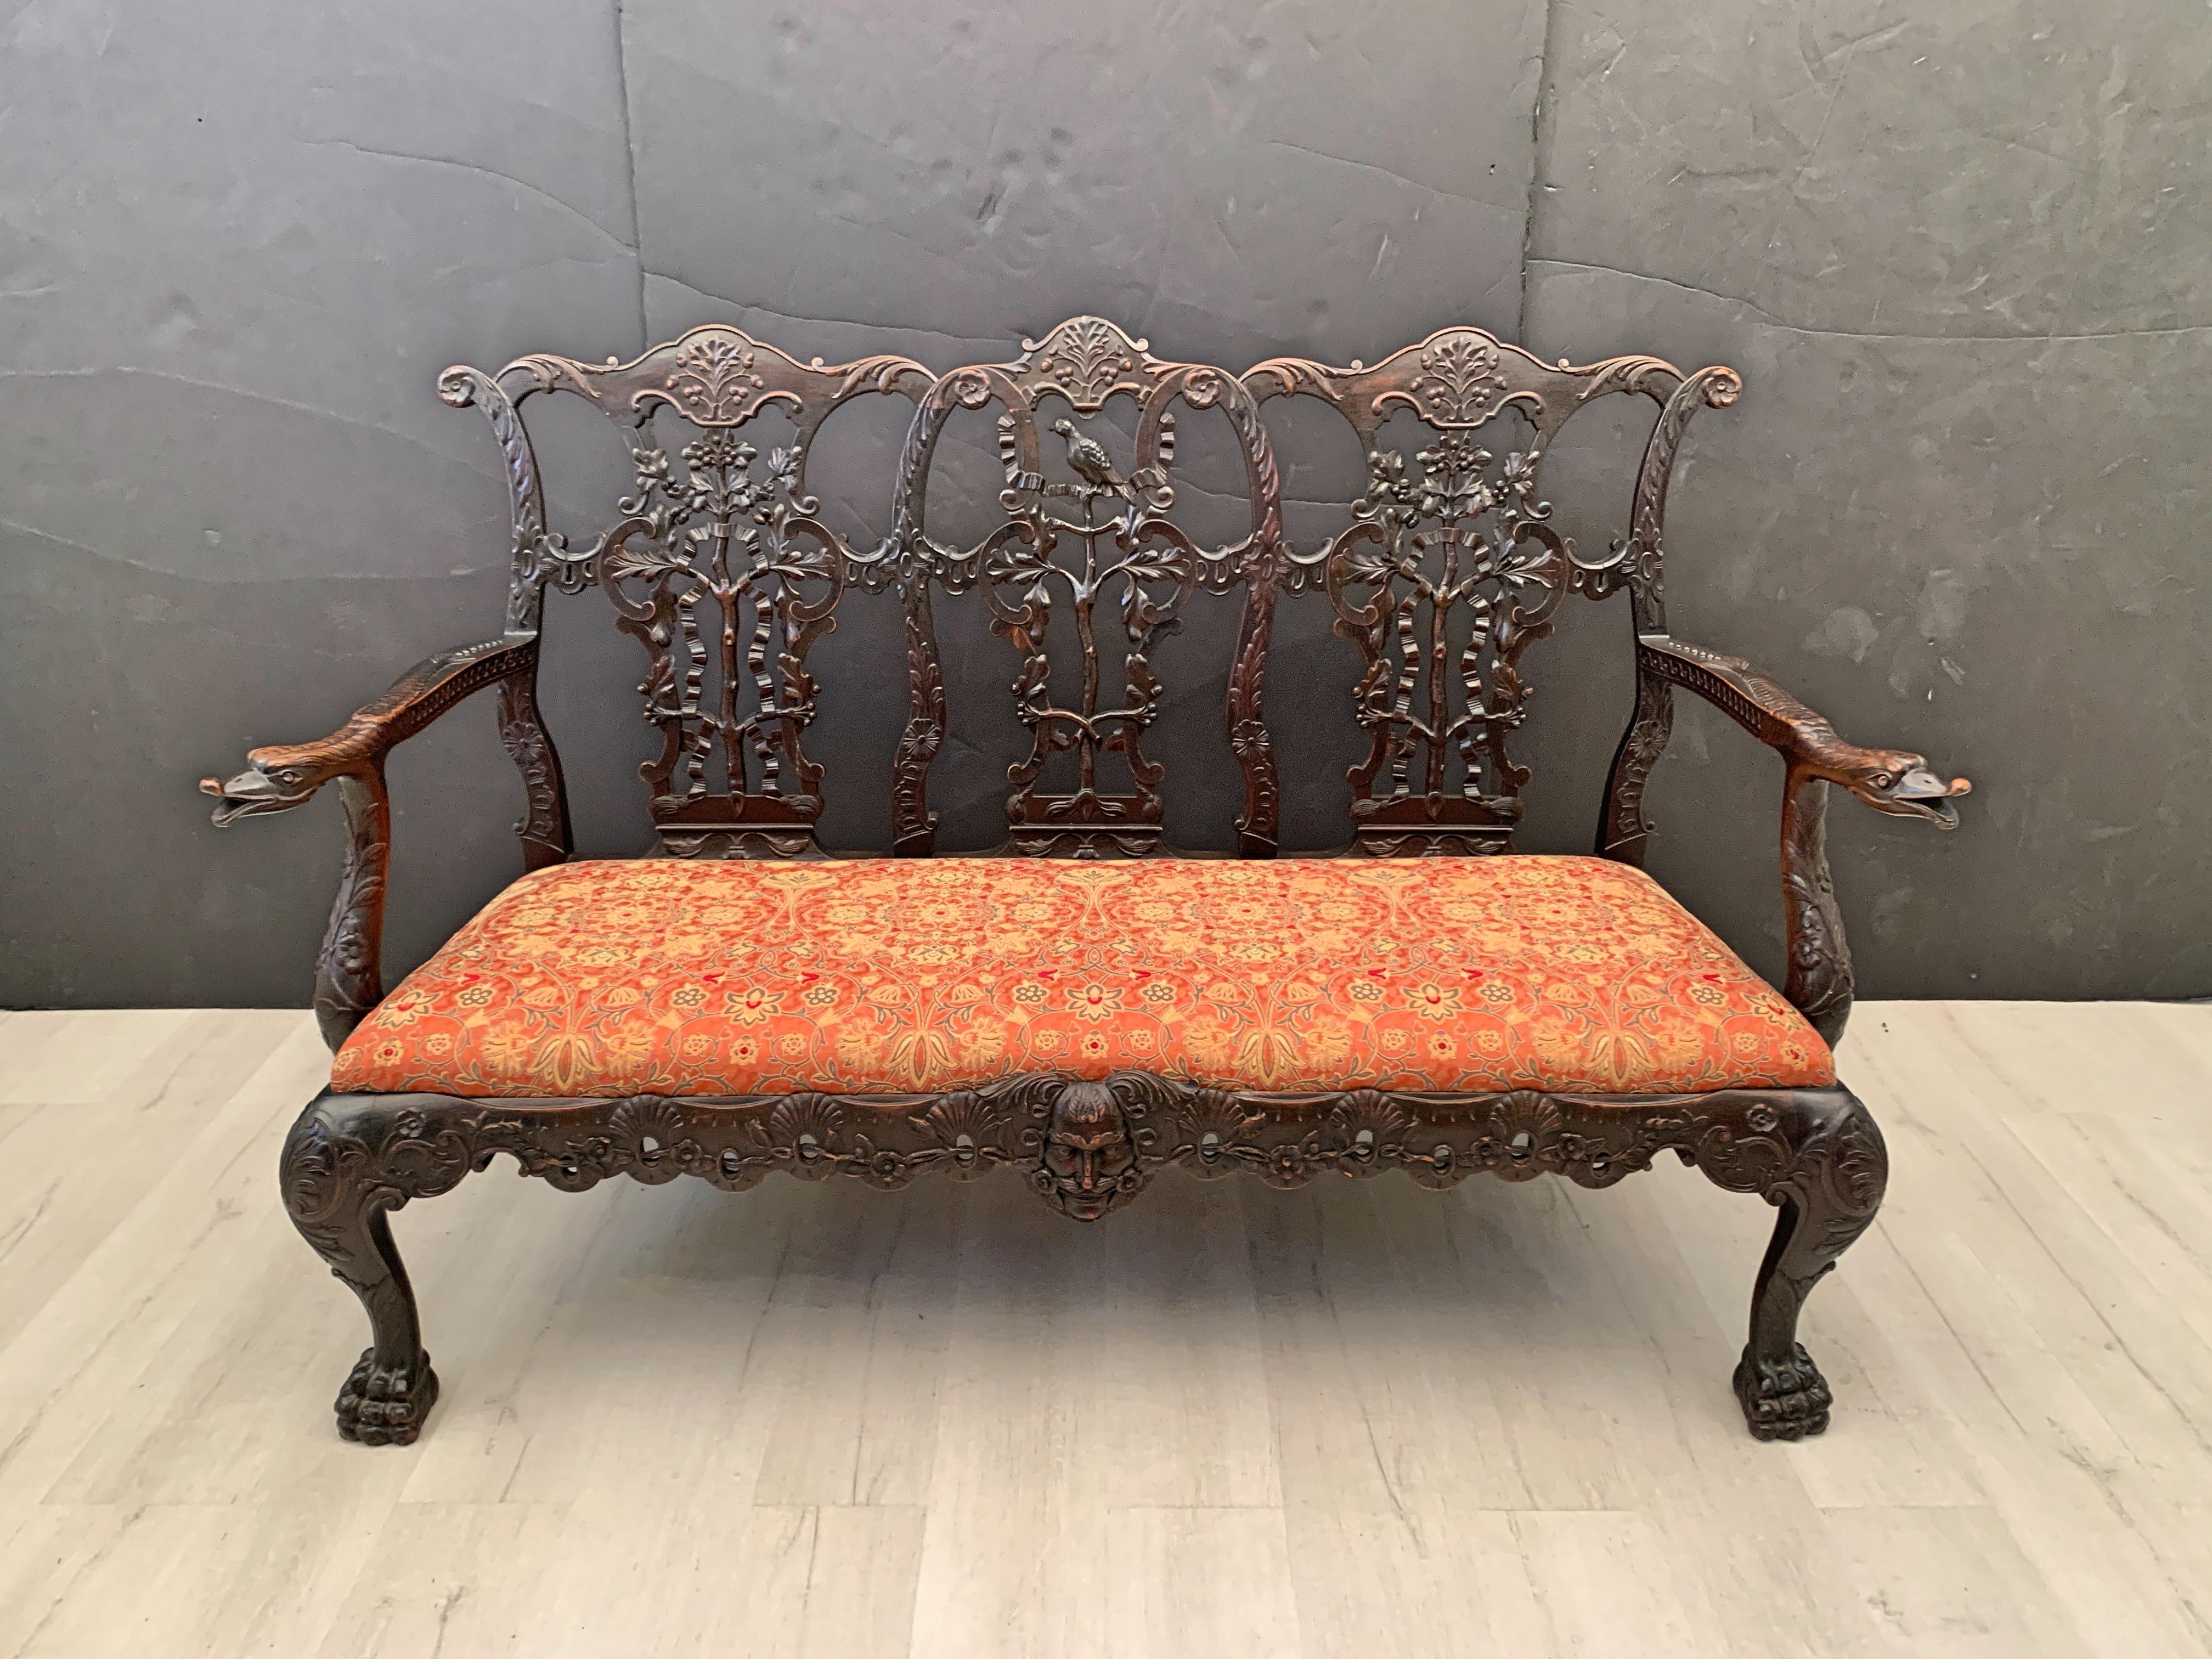 A carved mahogany Georgian Chippendale style triple back settee with ribbon back design, based on a design by Thomas Chippendale, late 19th century, England. 

The triple back settee finely and elaborately carved from a dark and lustrous mahogany,